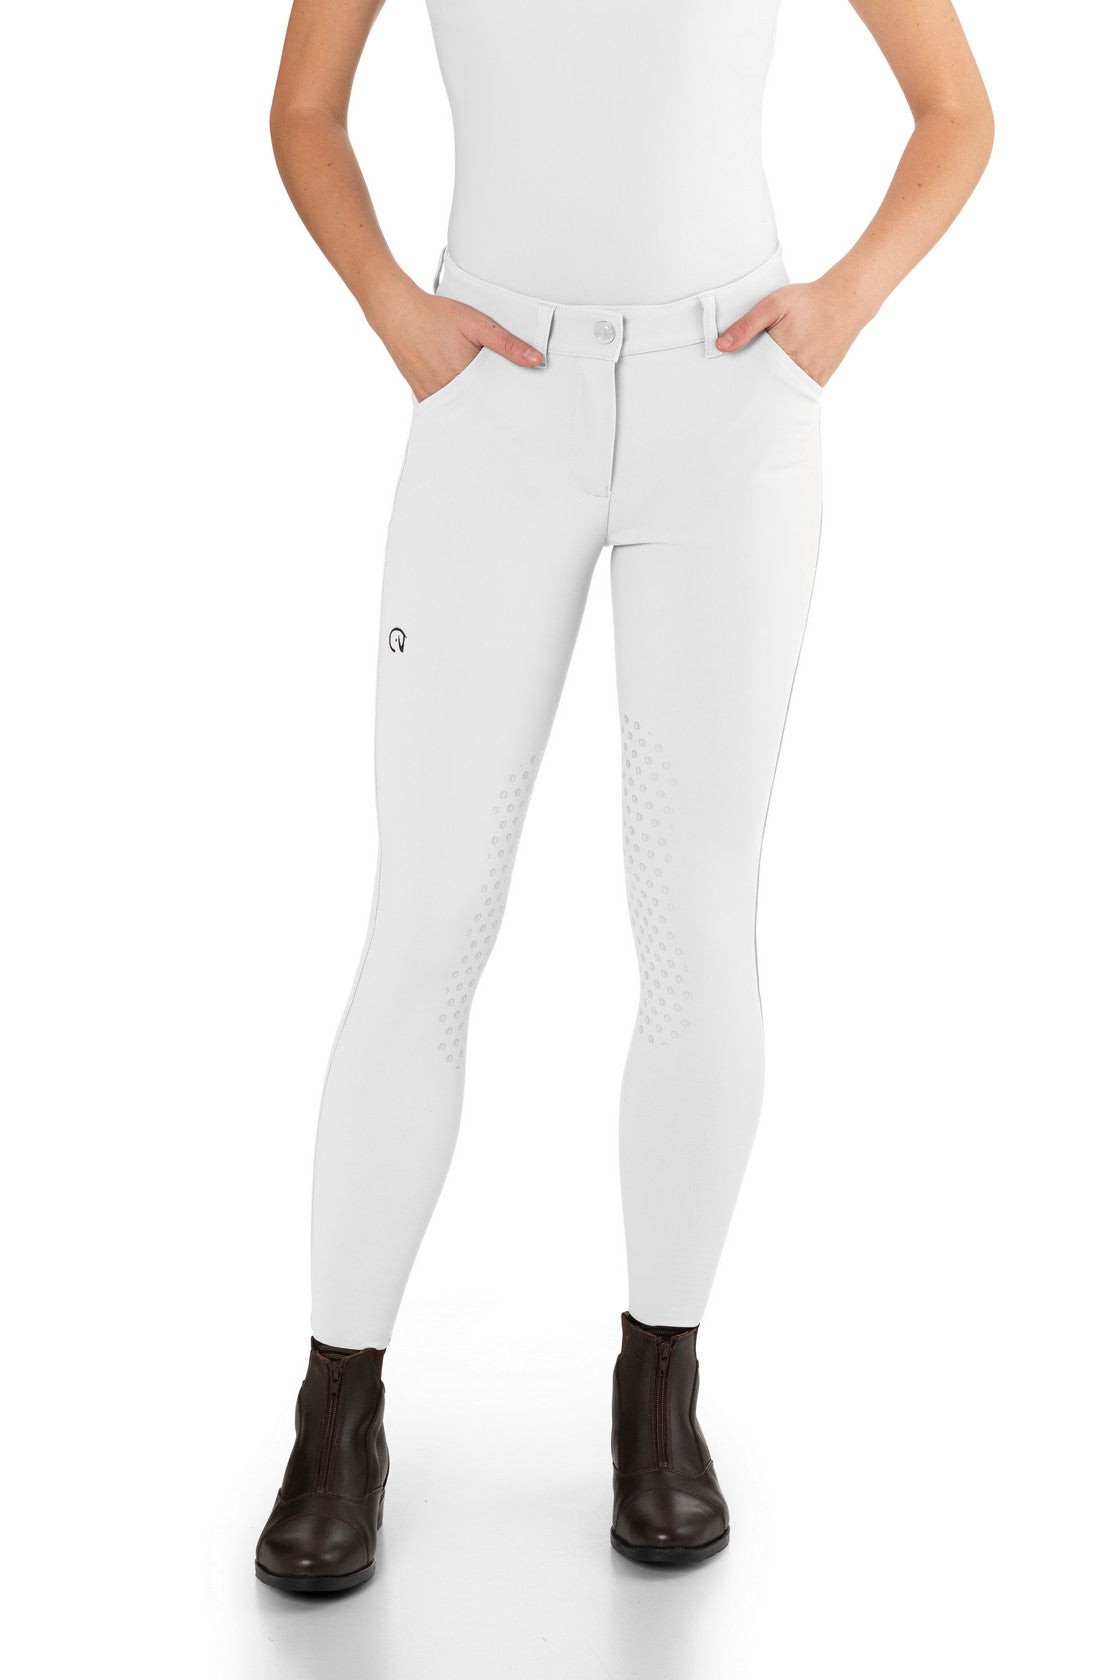 eog7 white show jumping breeches